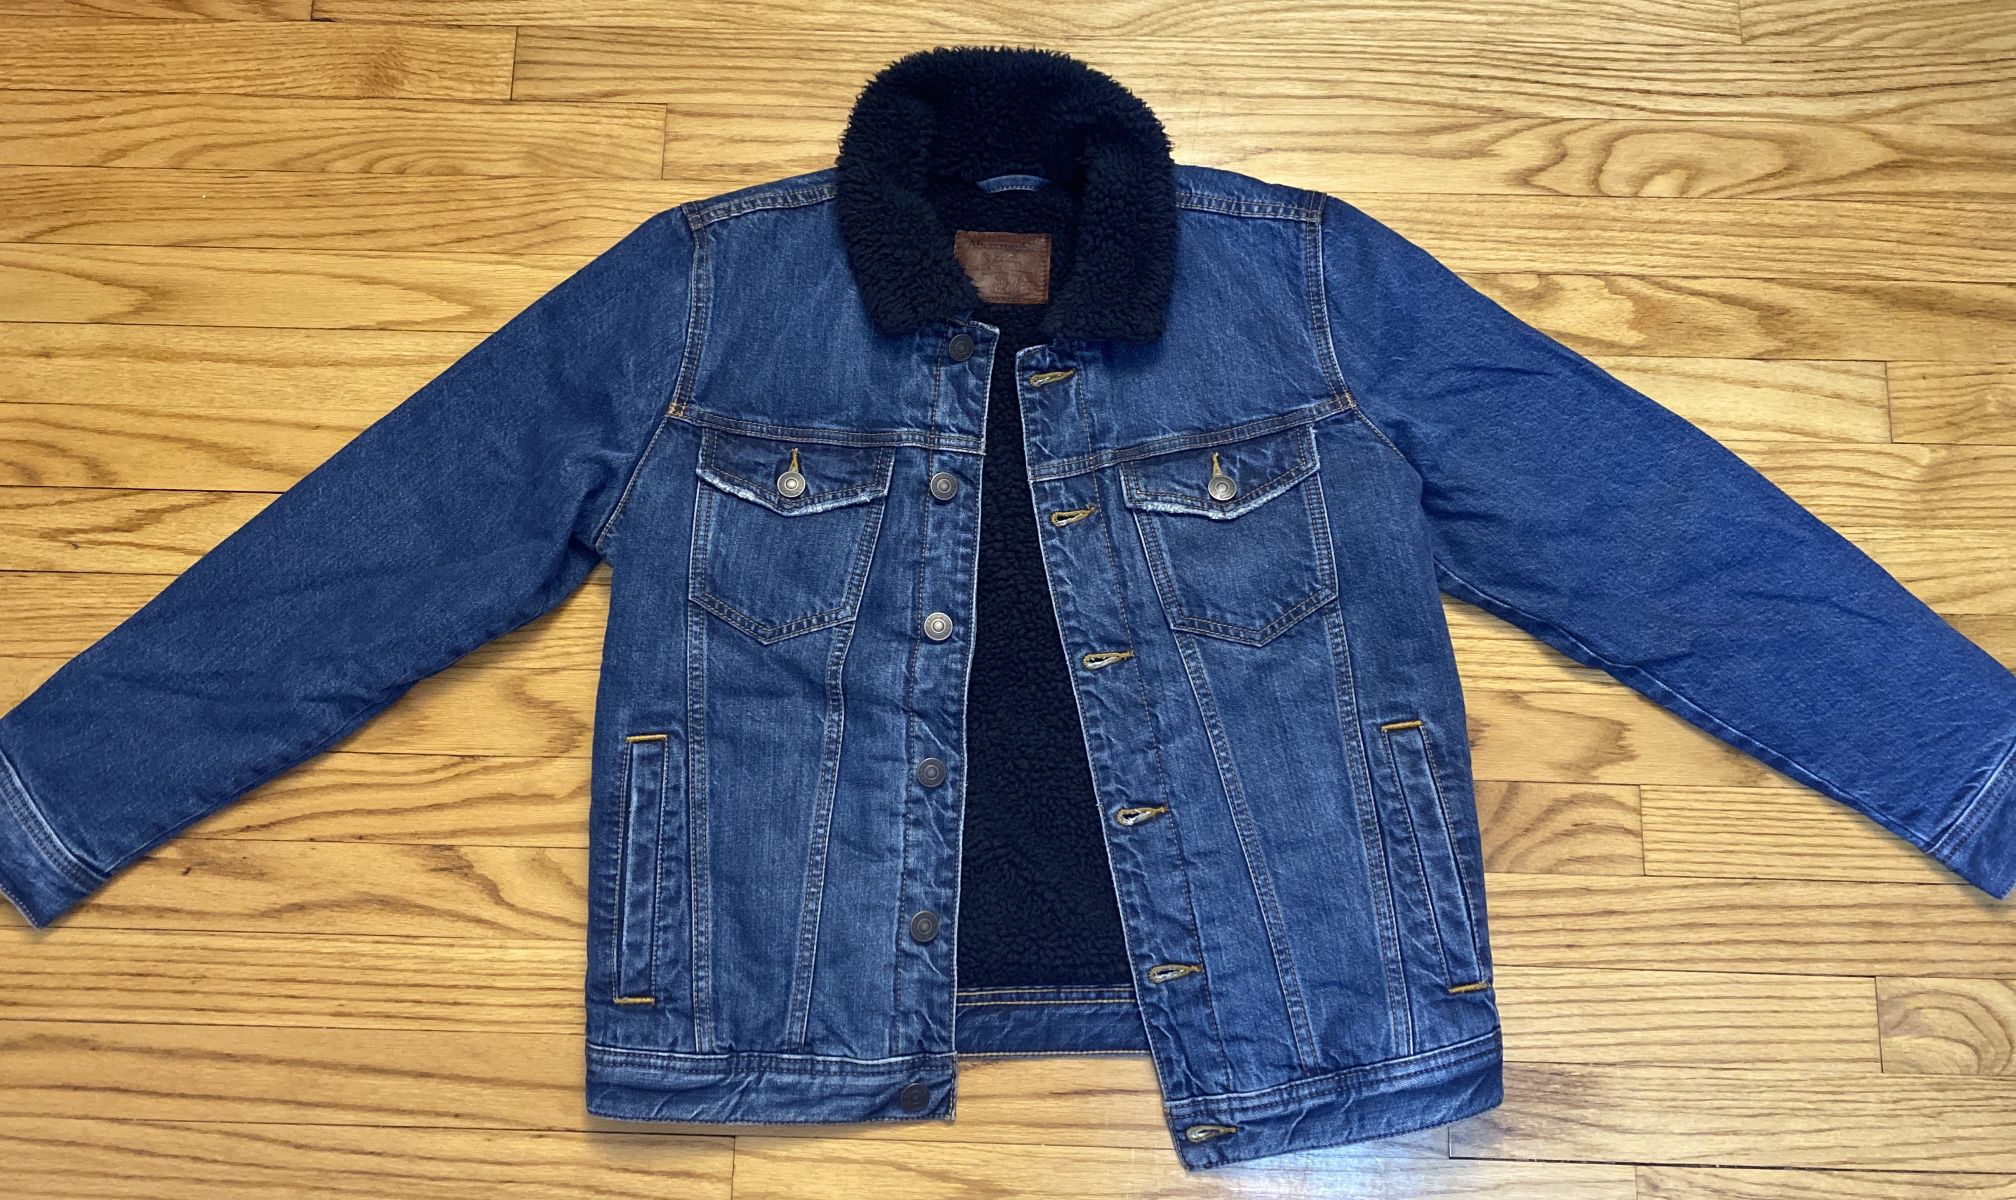 Abercrombie & Fitch Distressed Denim JacketFleece Lined Blue Men’s Sz XS new without tags! 